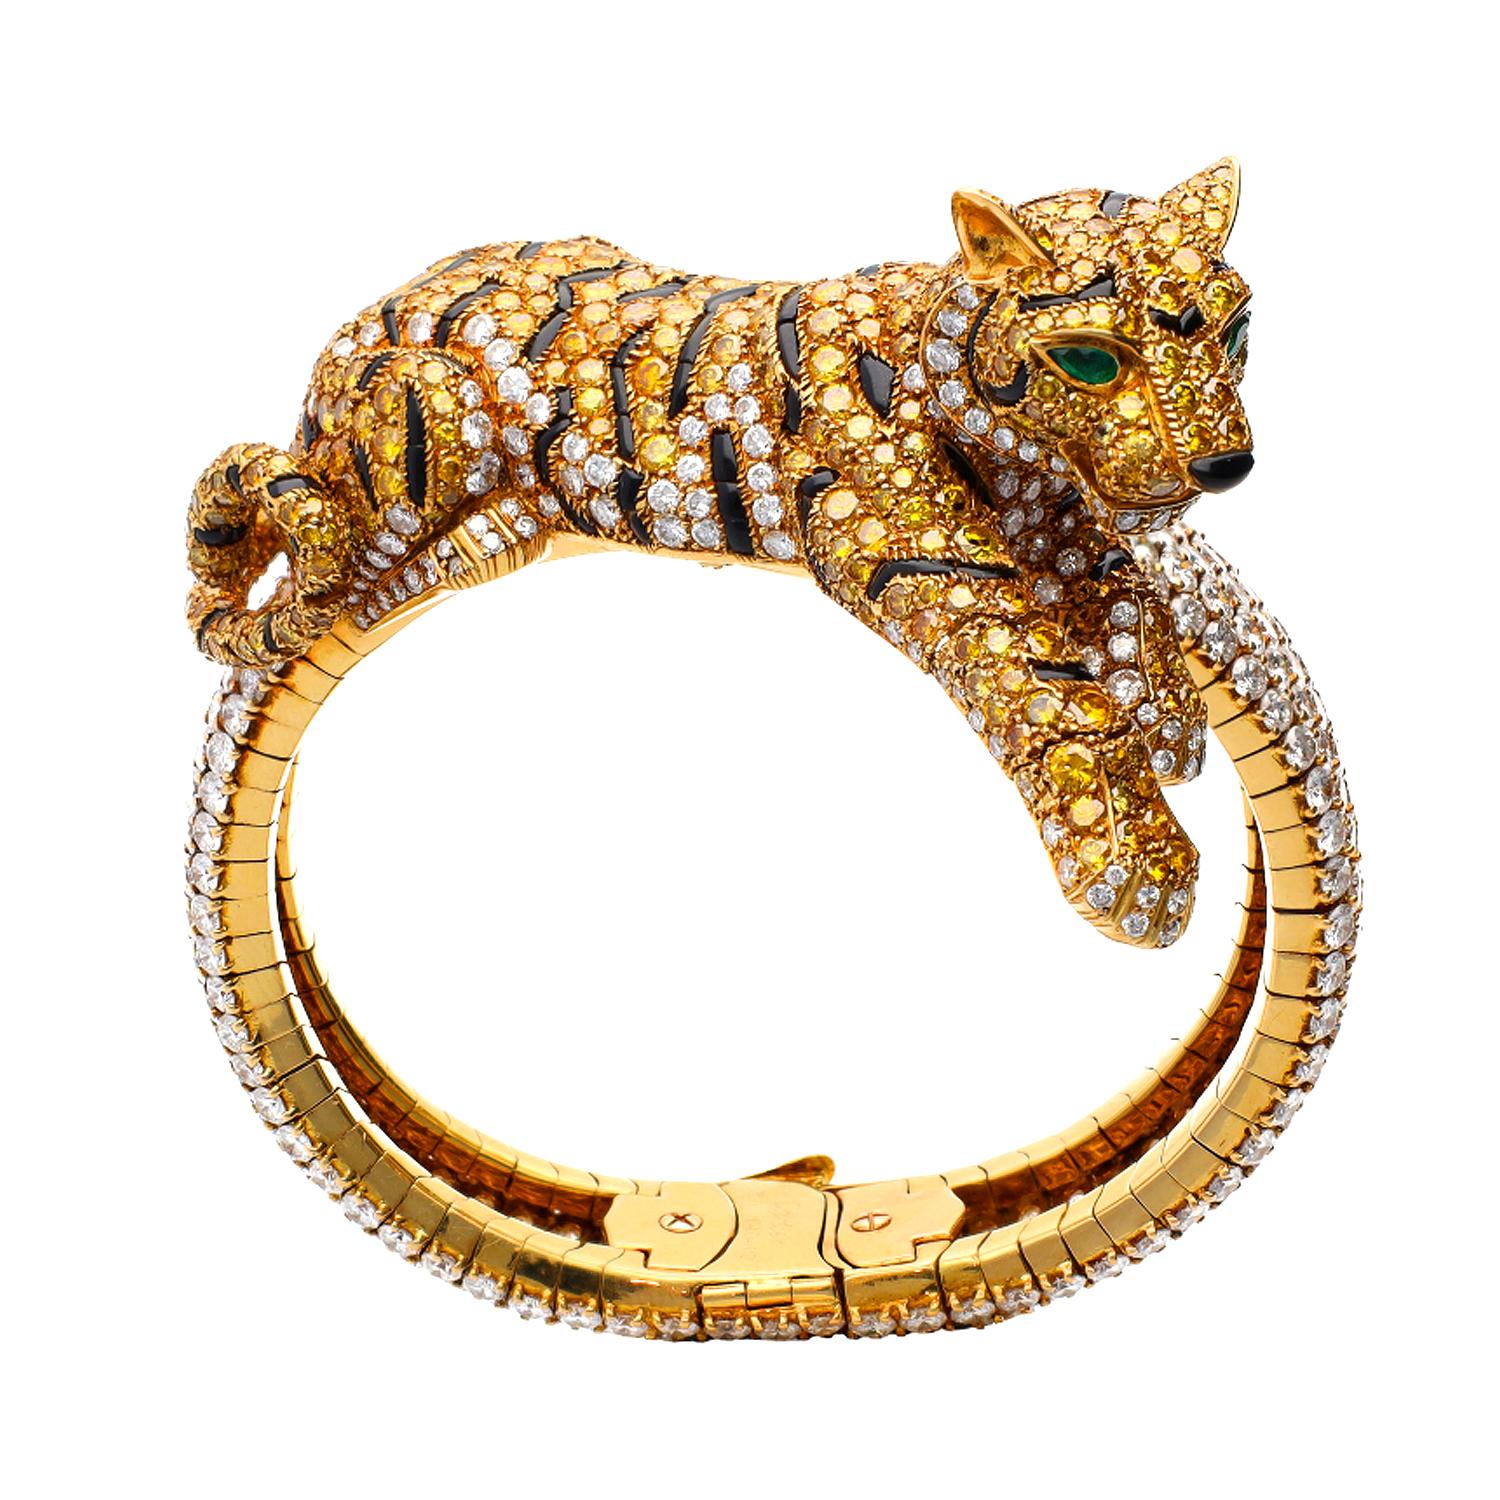 CARTIER Vivid Yellow, White Diamond Panther Watch
A magnificent 18k yellow gold Panthere watch, set with vivid yellow and white diamonds, emerald eyes and onyx, signed Cartier with French hallmarks.
Inner circumference is approx. 6″, bracelet width